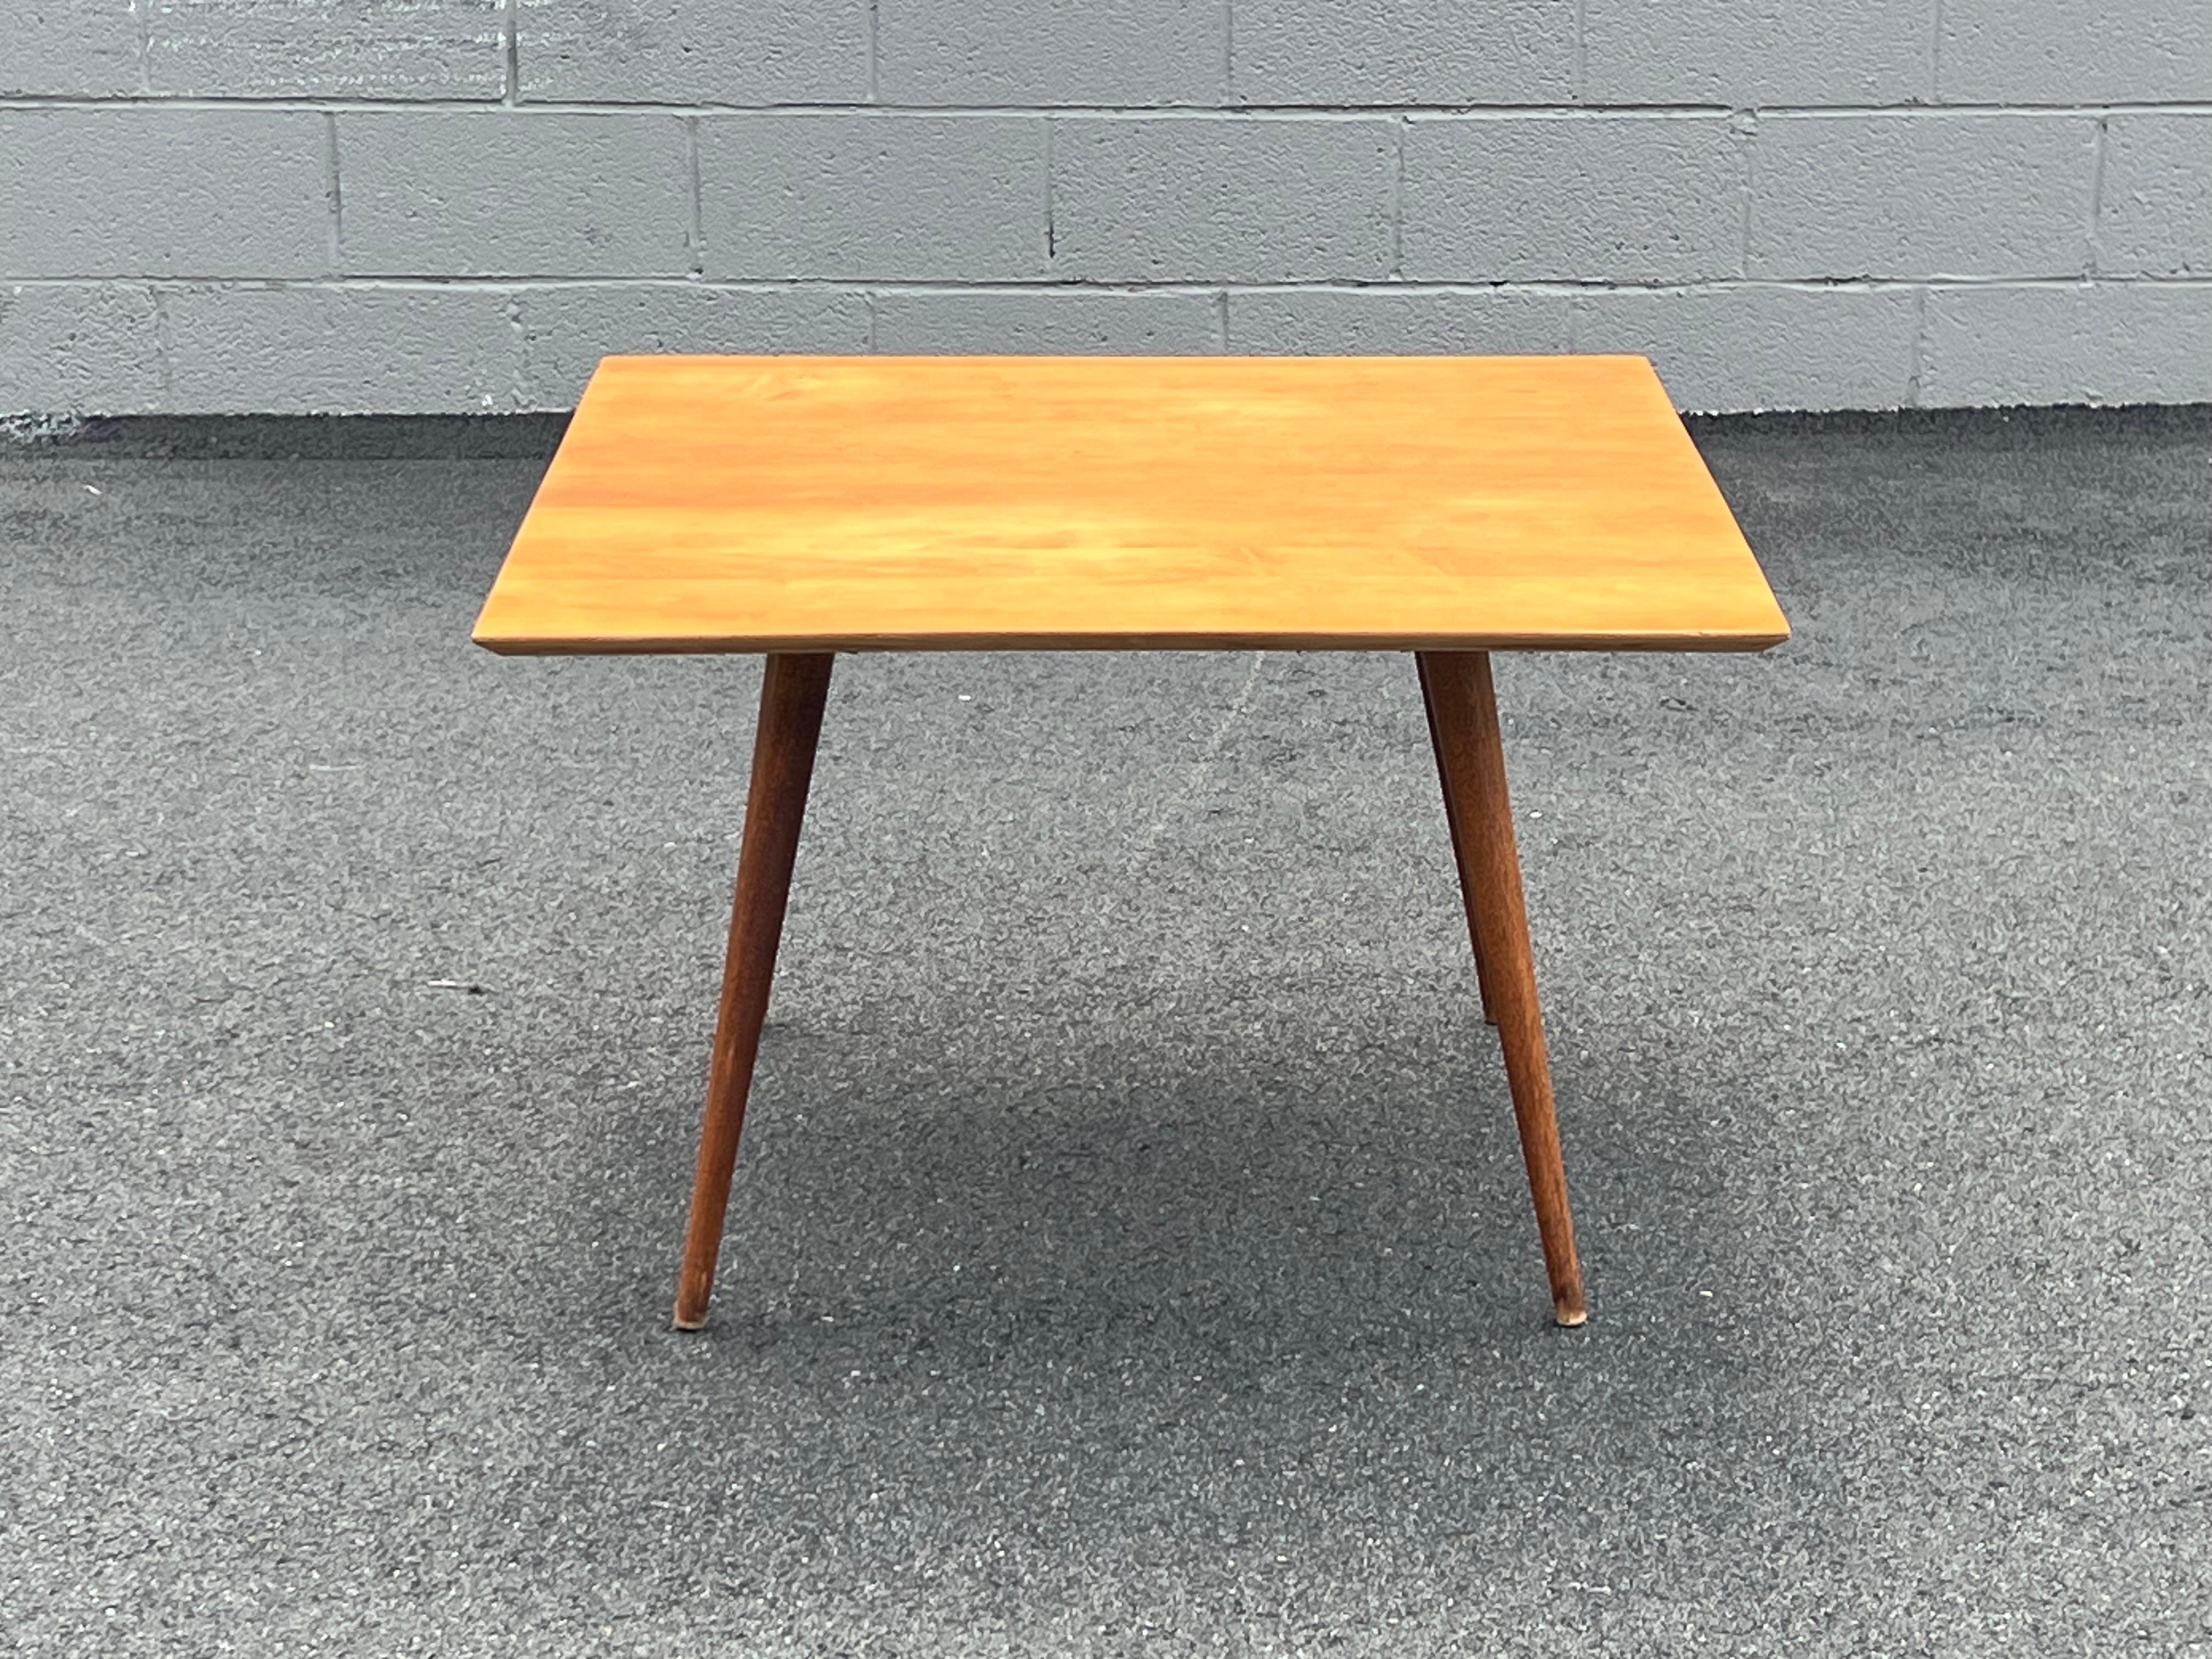 Mid-century minimalistic coffee table designed by Paul McCobb for Planner Group, USA. This low-profile coffee table is made from beautifully crafted solid maple wood. Flared long legs compliment the square top well. Minimalist in design, therefore